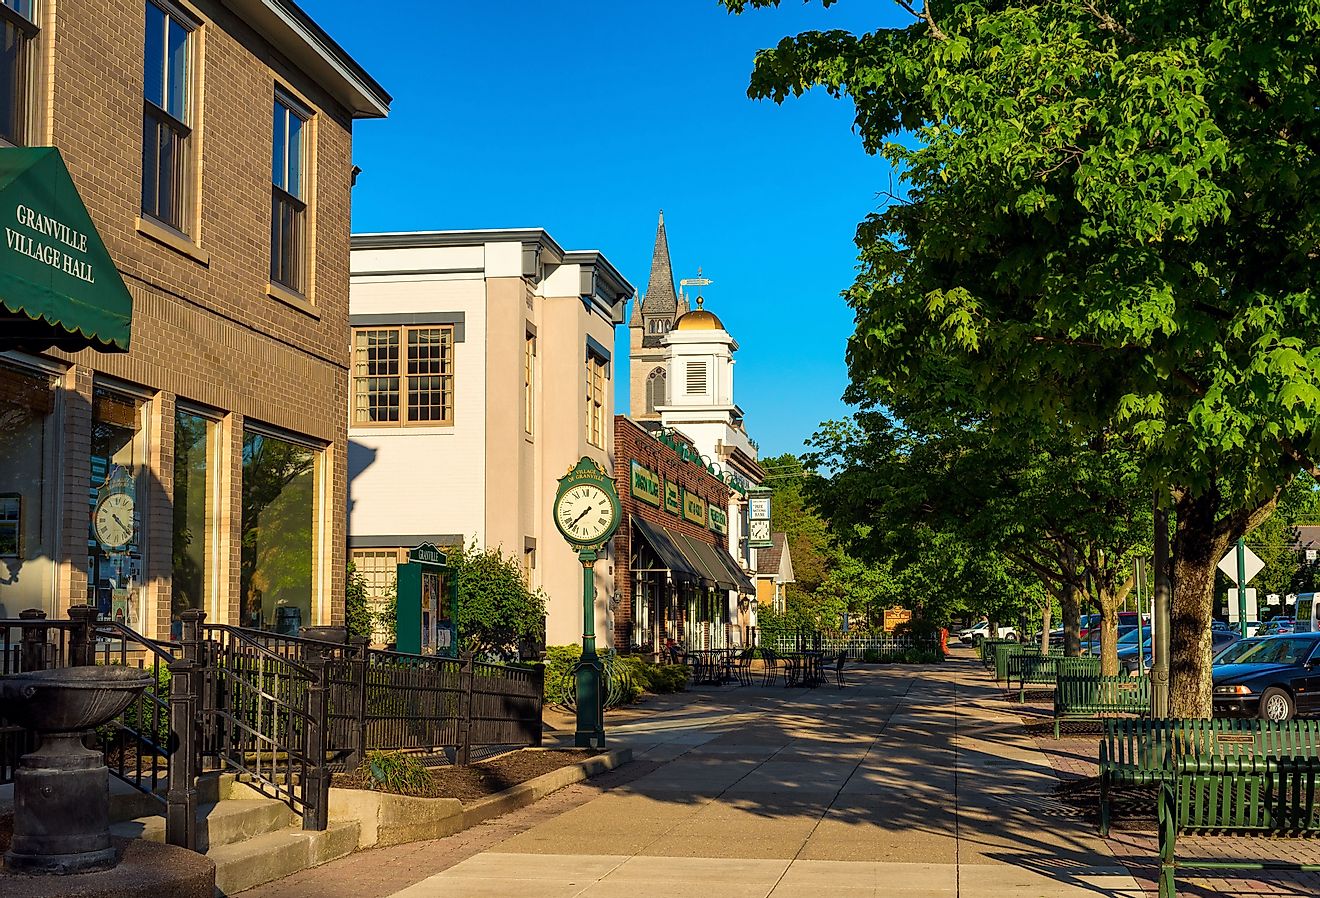 Churches and businesses line a shady block of Broadway Avenue in Granville, Ohio. Image credit Kenneth Sponsler via Shutterstock